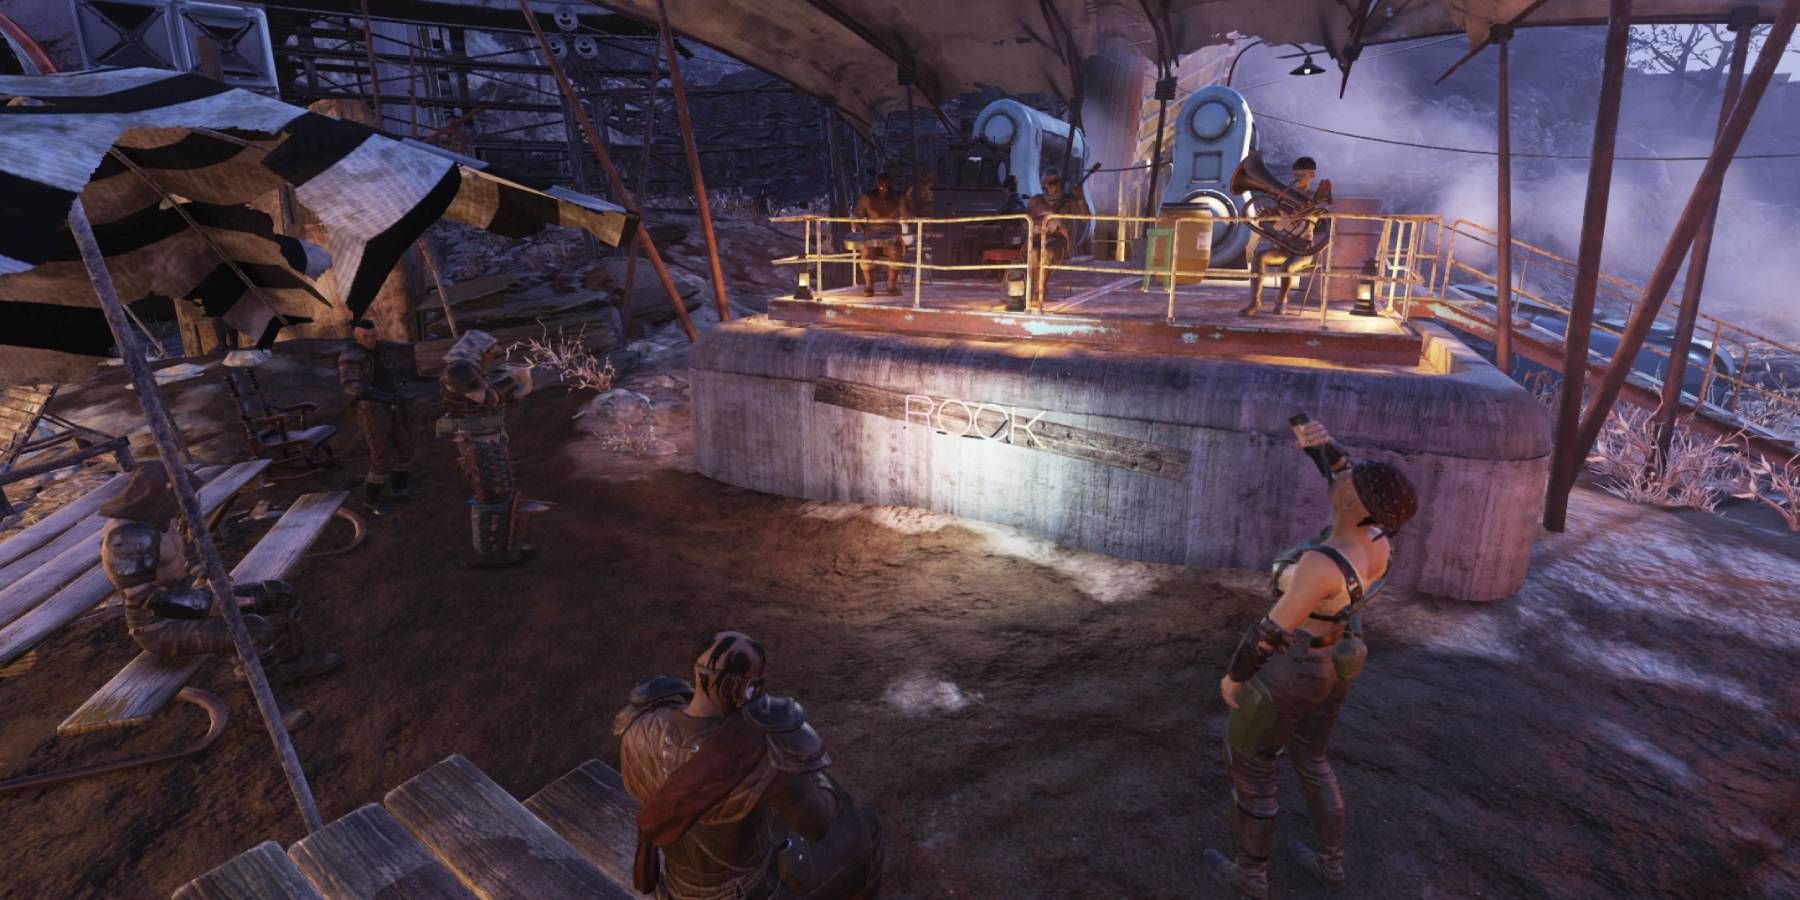 Raiders relaxing in Fallout 76